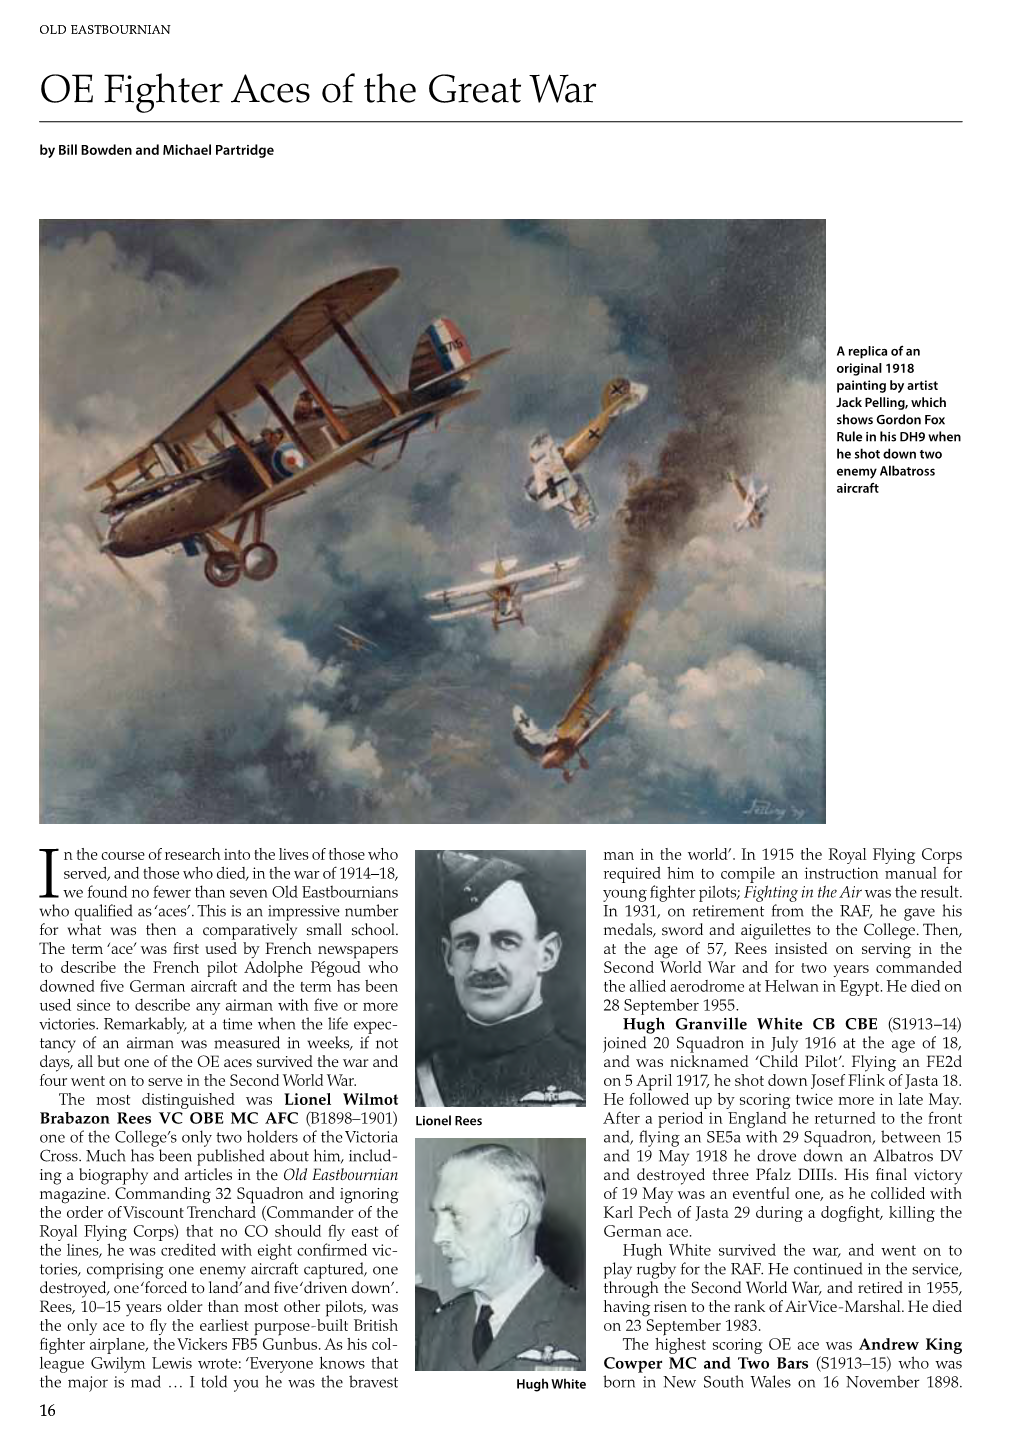 OE Fighter Aces of the Great War by Bill Bowden and Michael Partridge